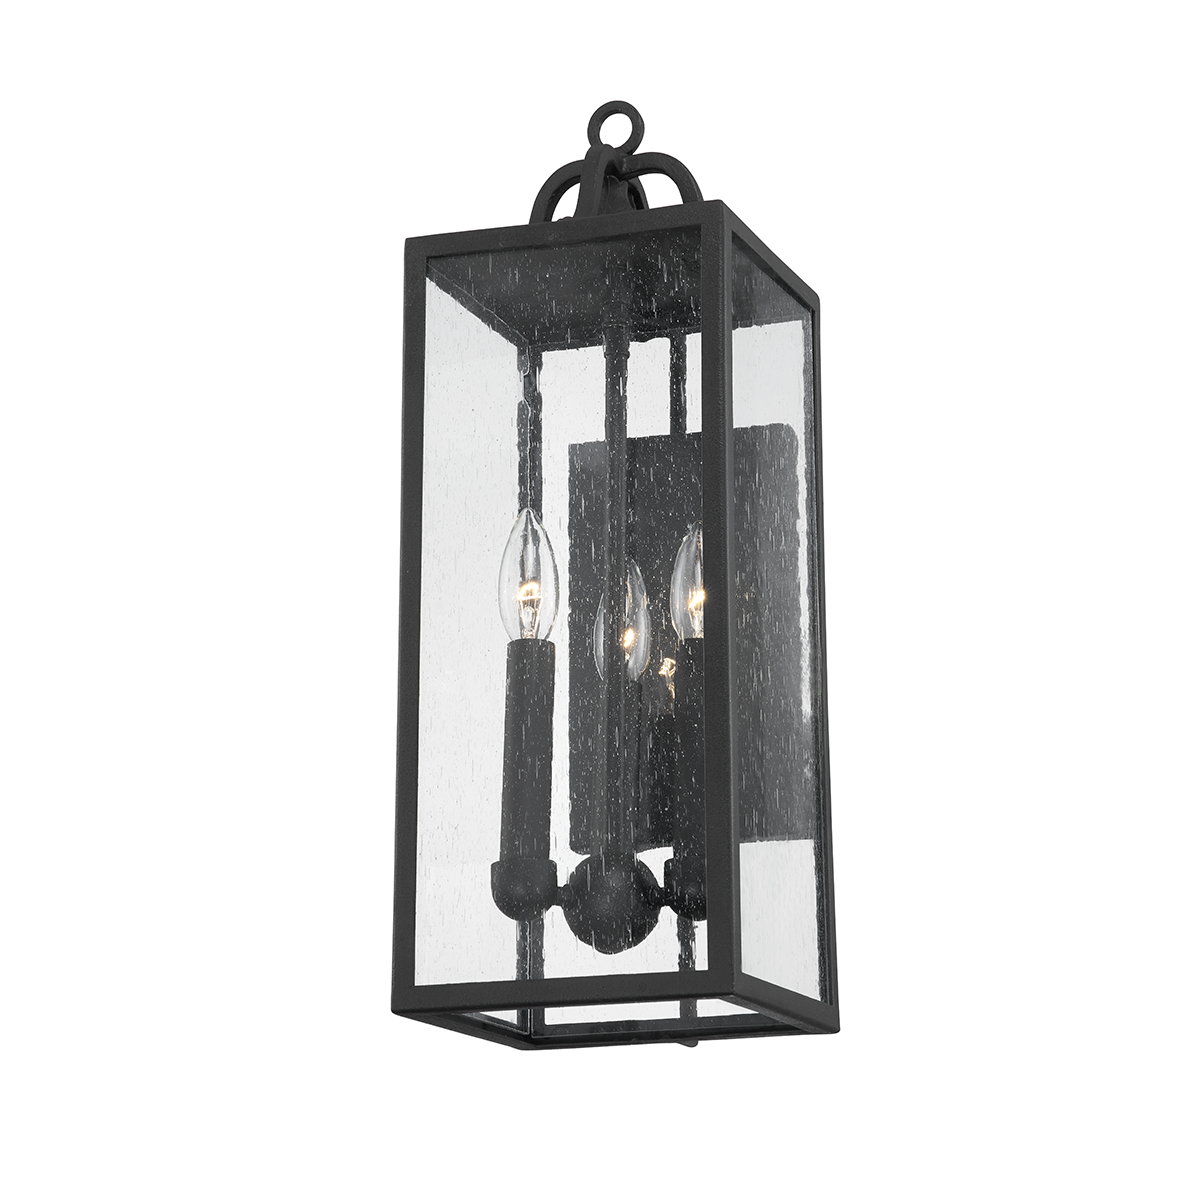 Troy Lighting Caiden Wall Sconce Wall Sconce Troy Lighting FORGED IRON 7x7x21.75 